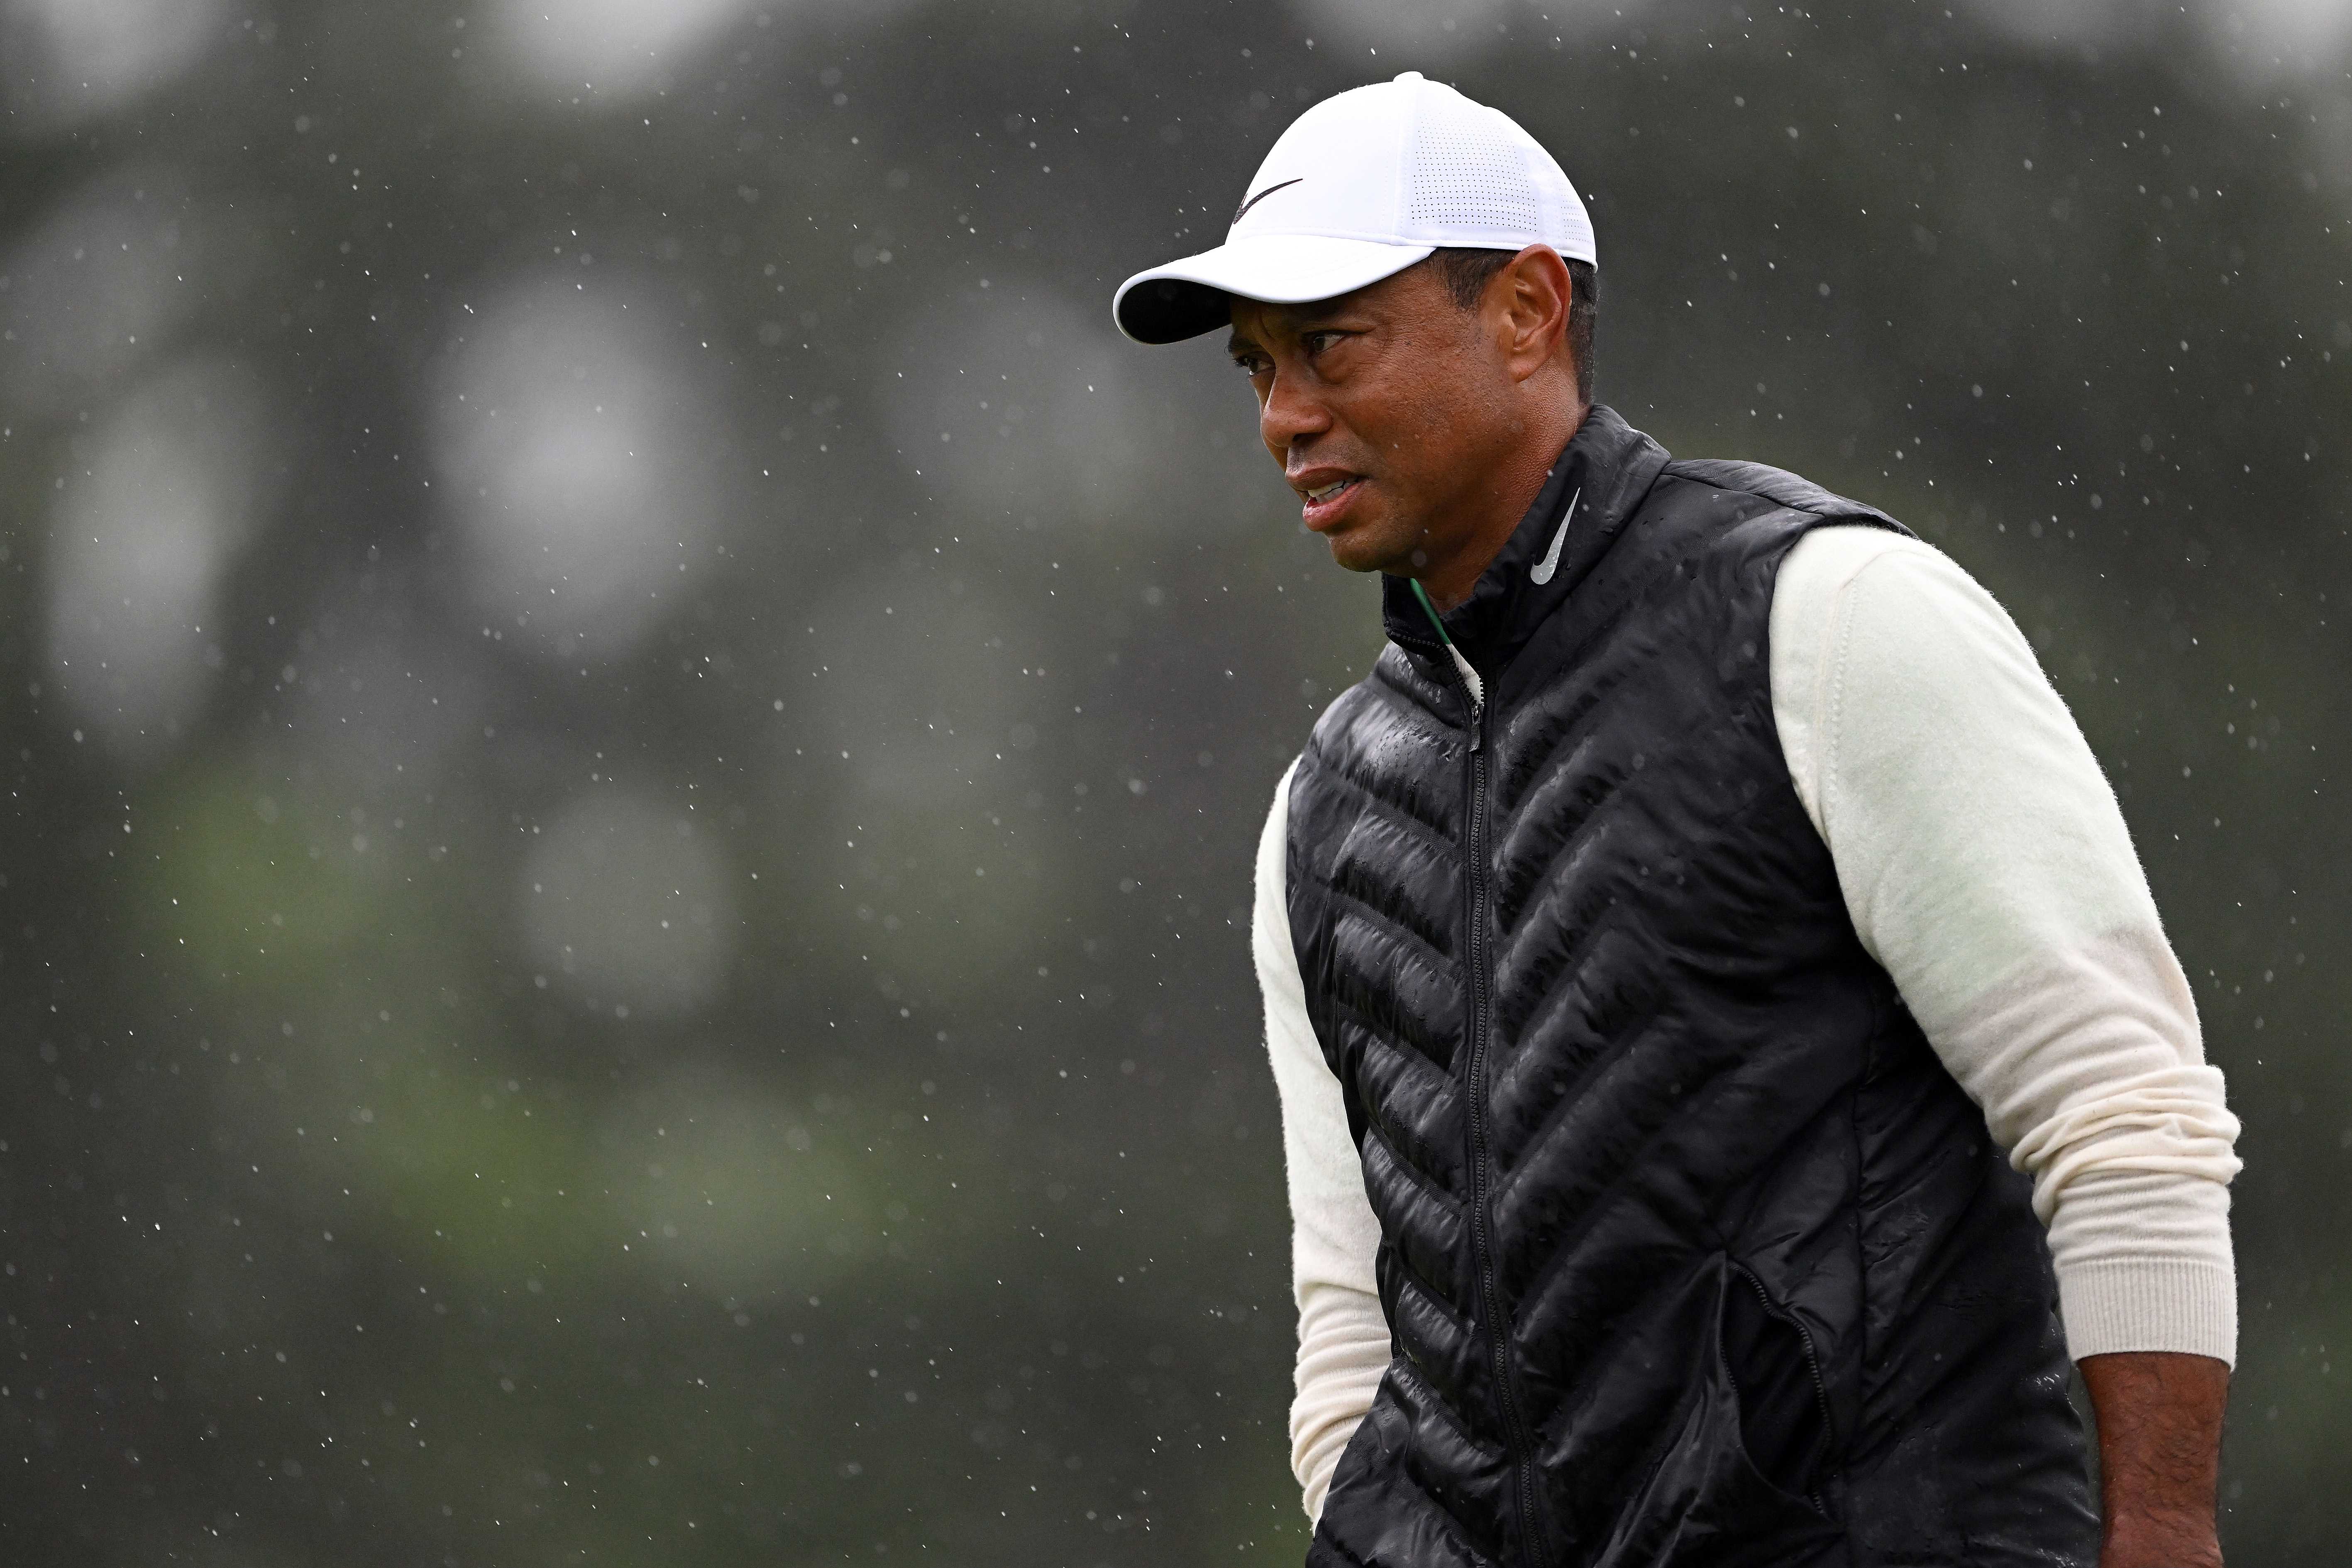 Tiger Woods is accused of sexual harassment by ex-girlfriend, according to court document picture